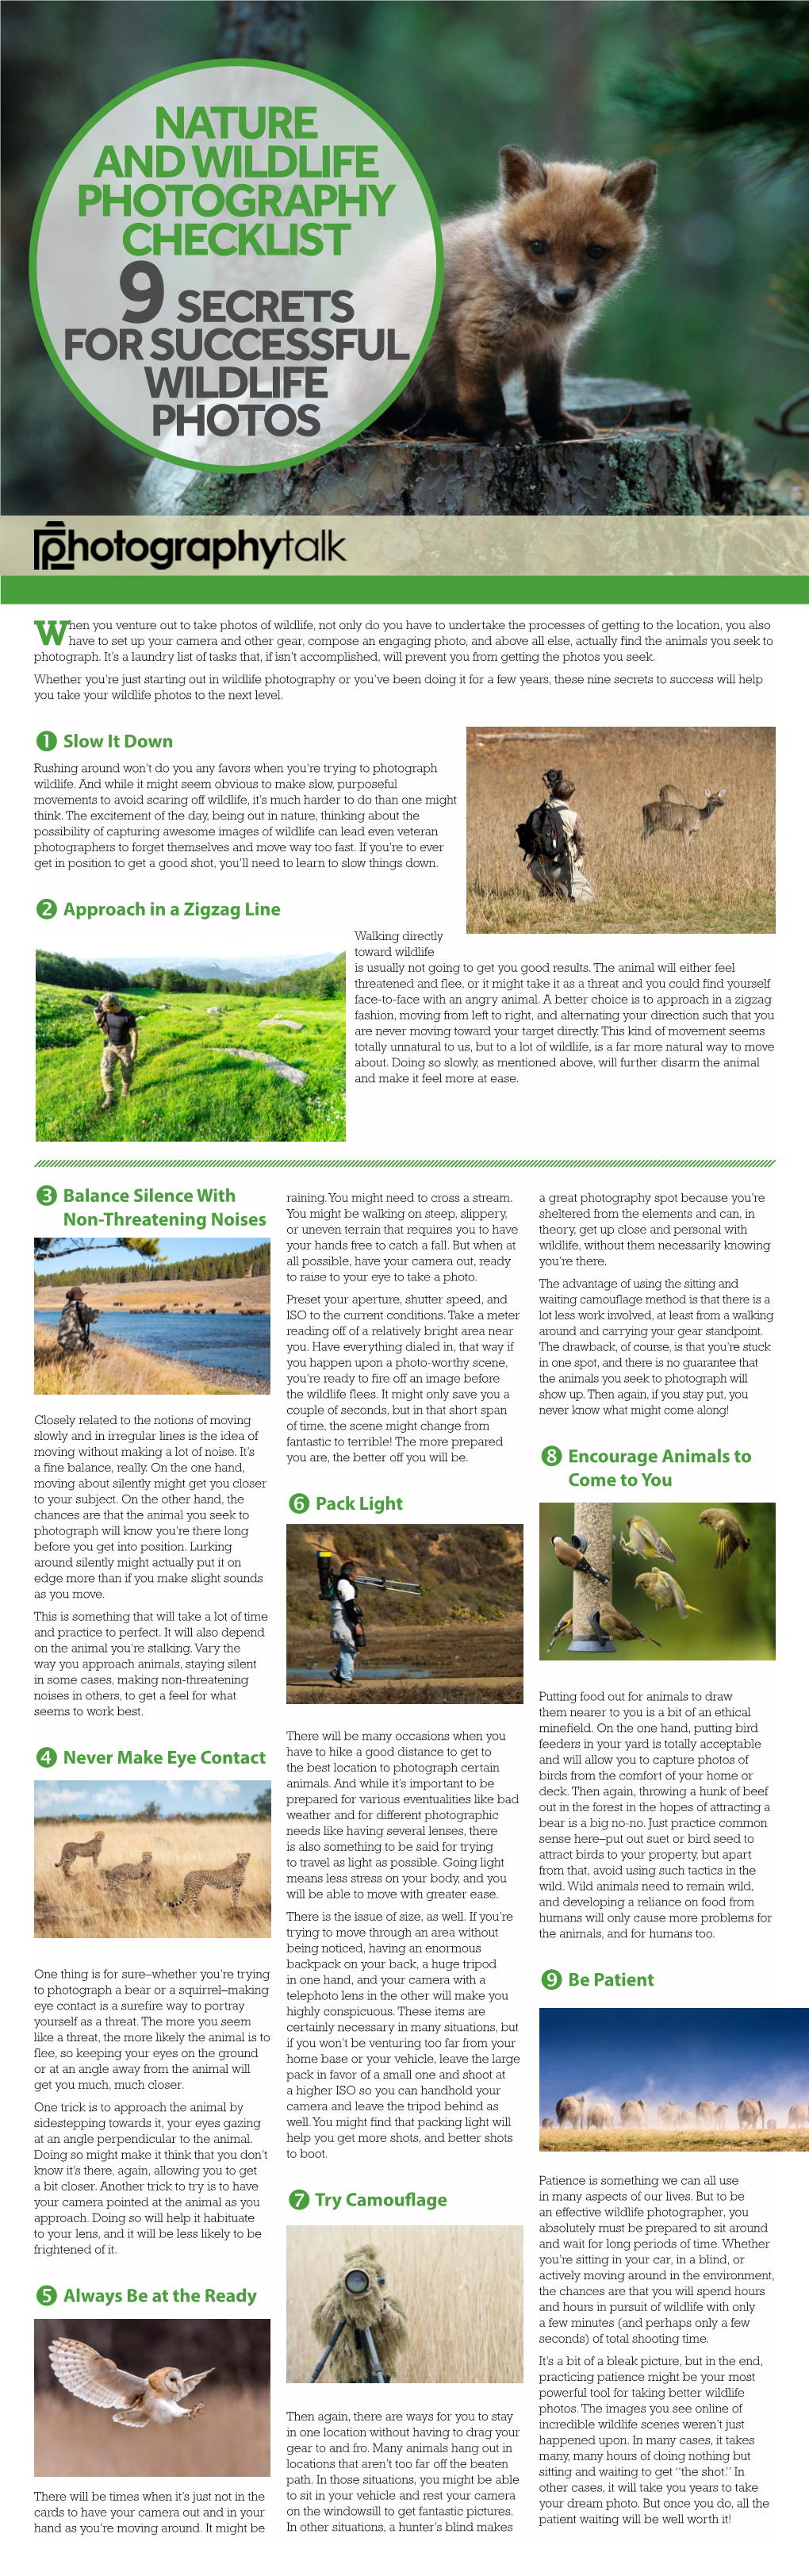 Nature and Wildlife Photography Checklist 9 Secrets for Successful Wildlife Photos